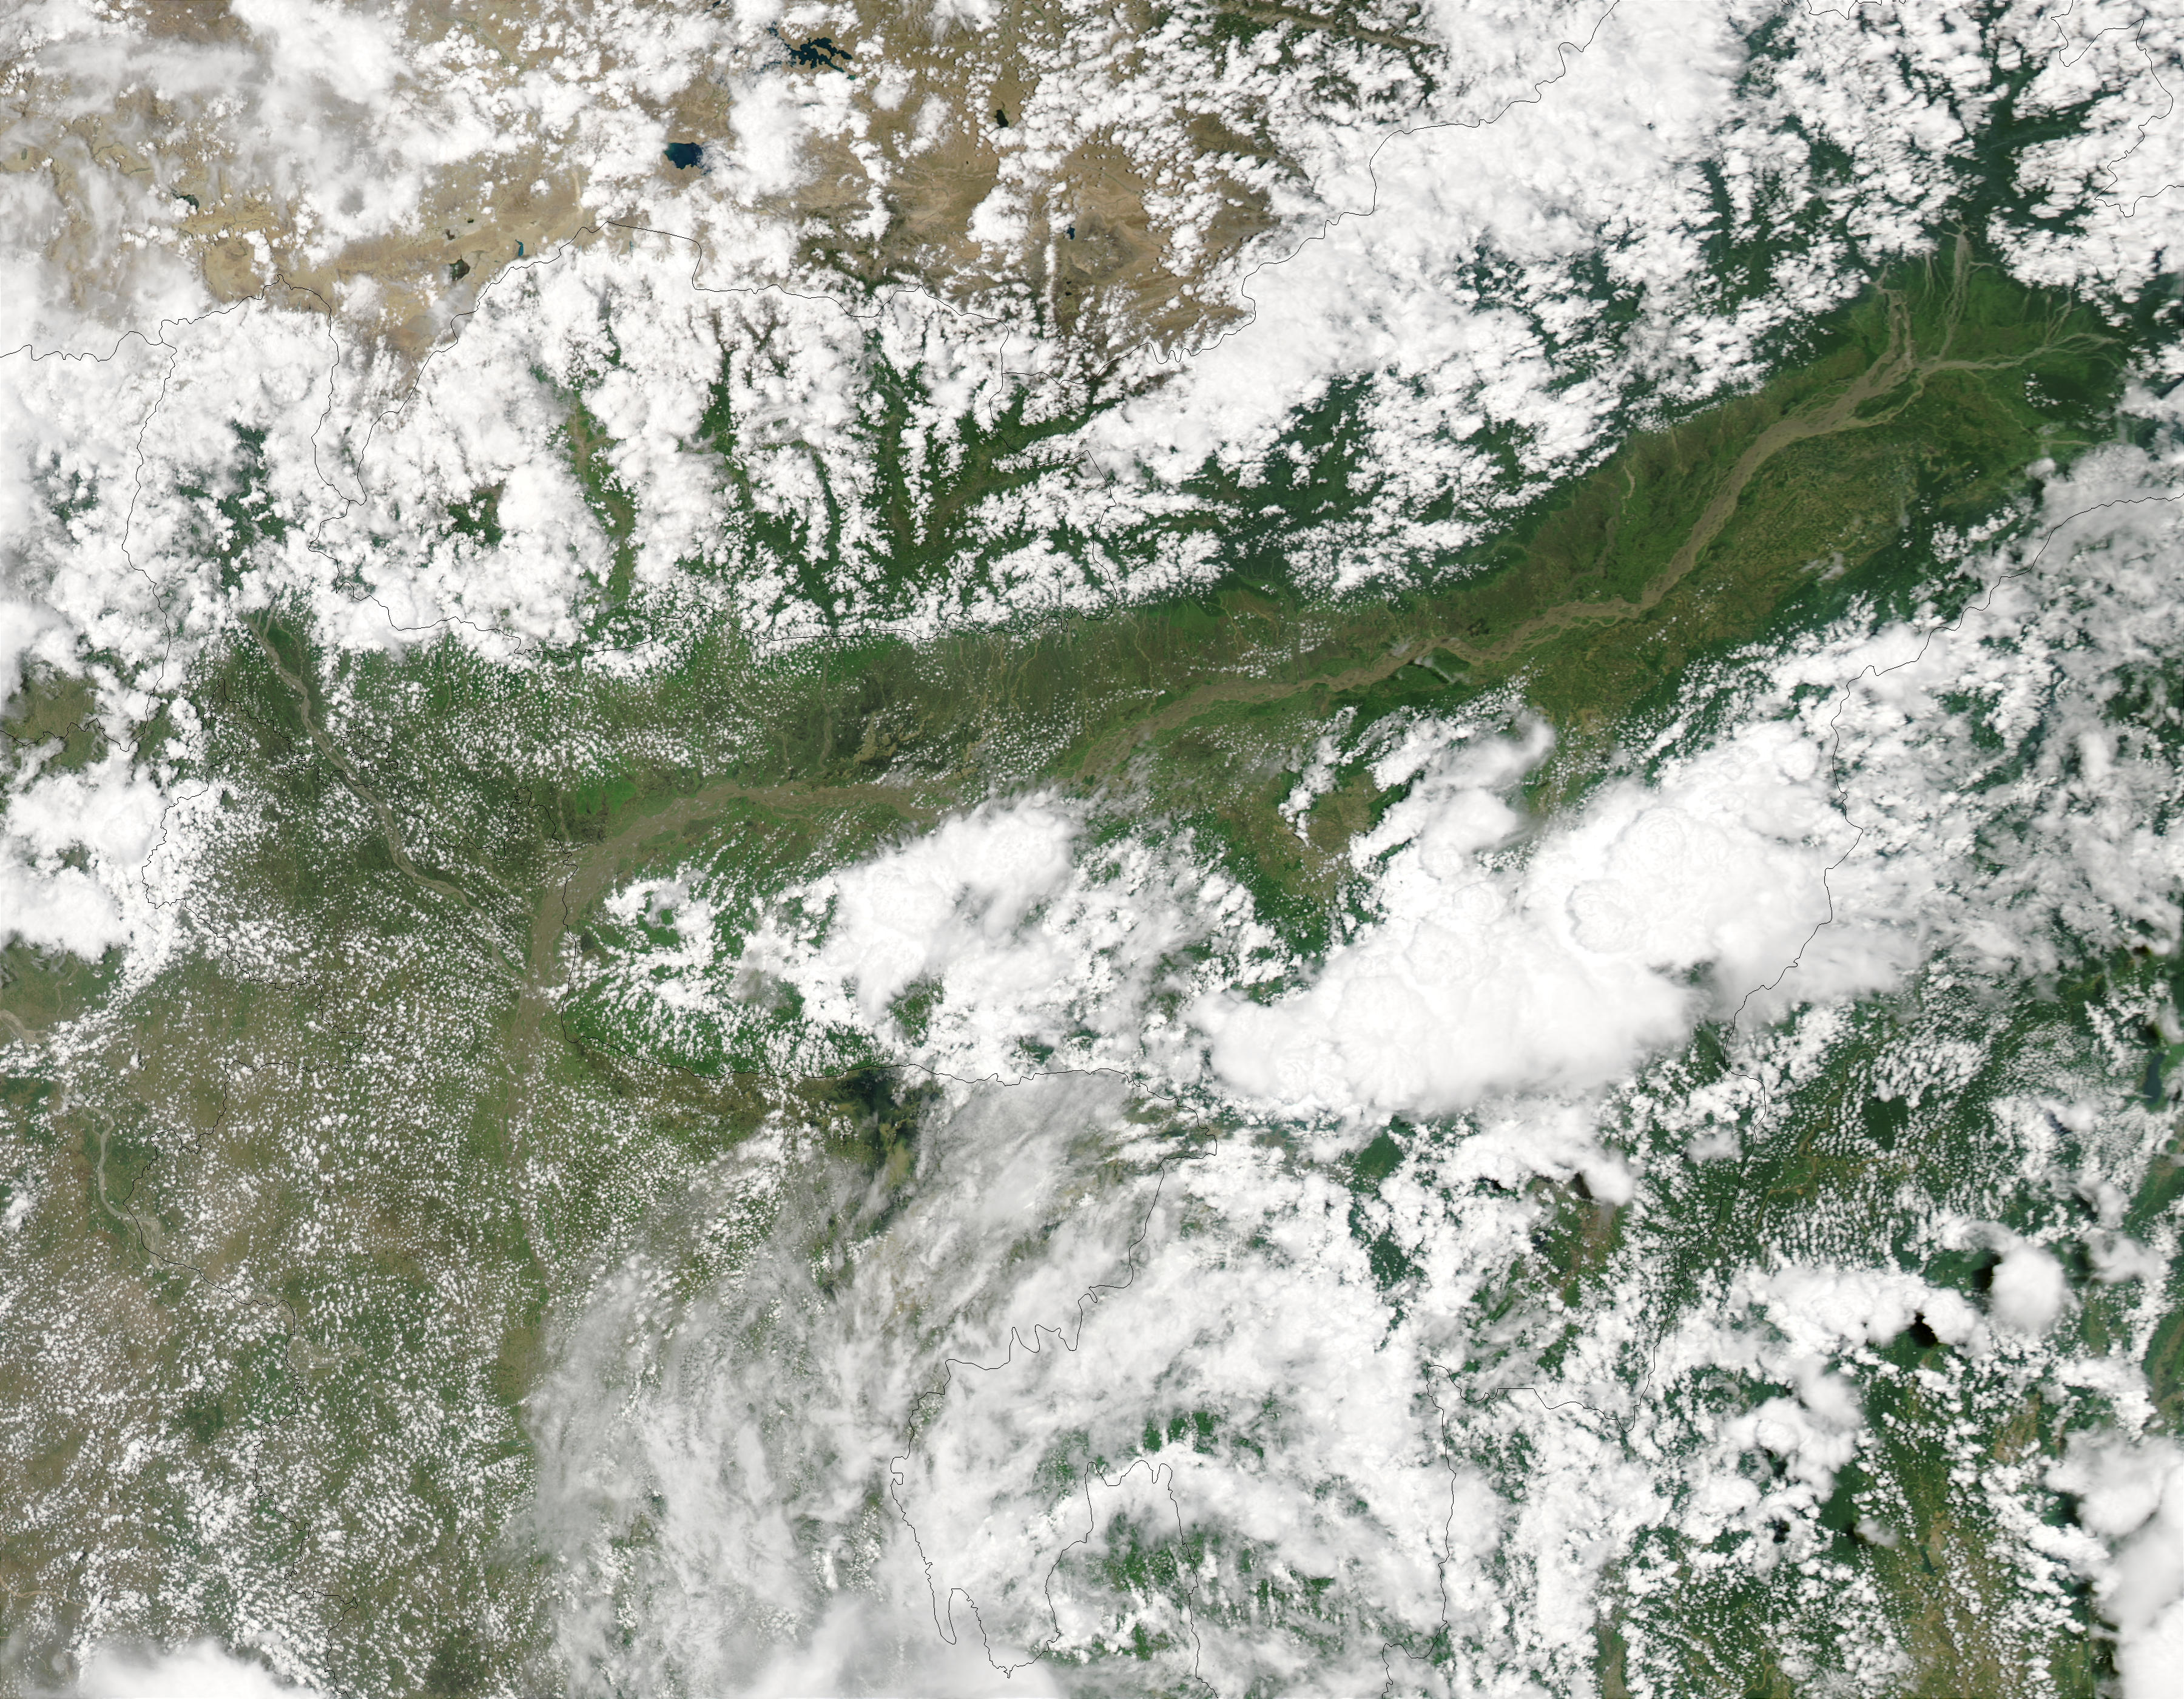 Floods in Northeast India and Bangladesh